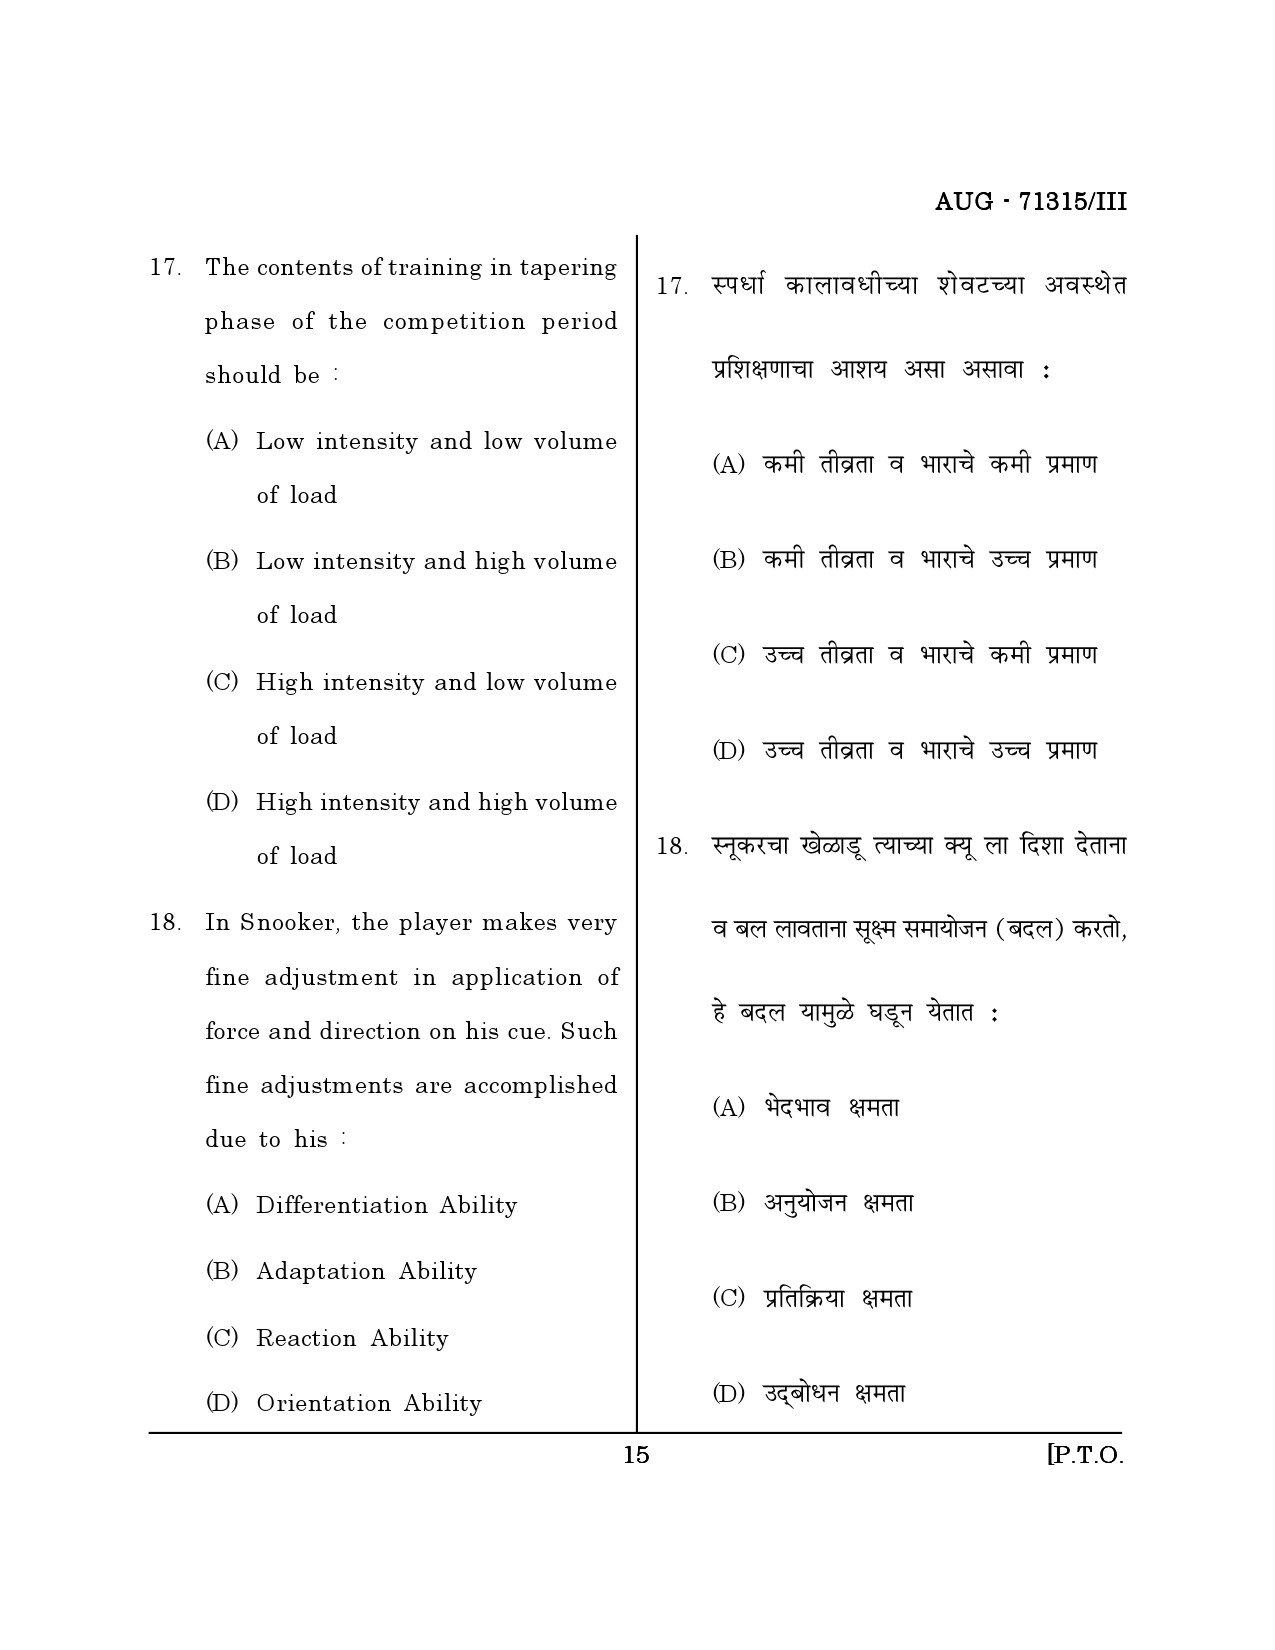 Maharashtra SET Physical Education Question Paper III August 2015 14